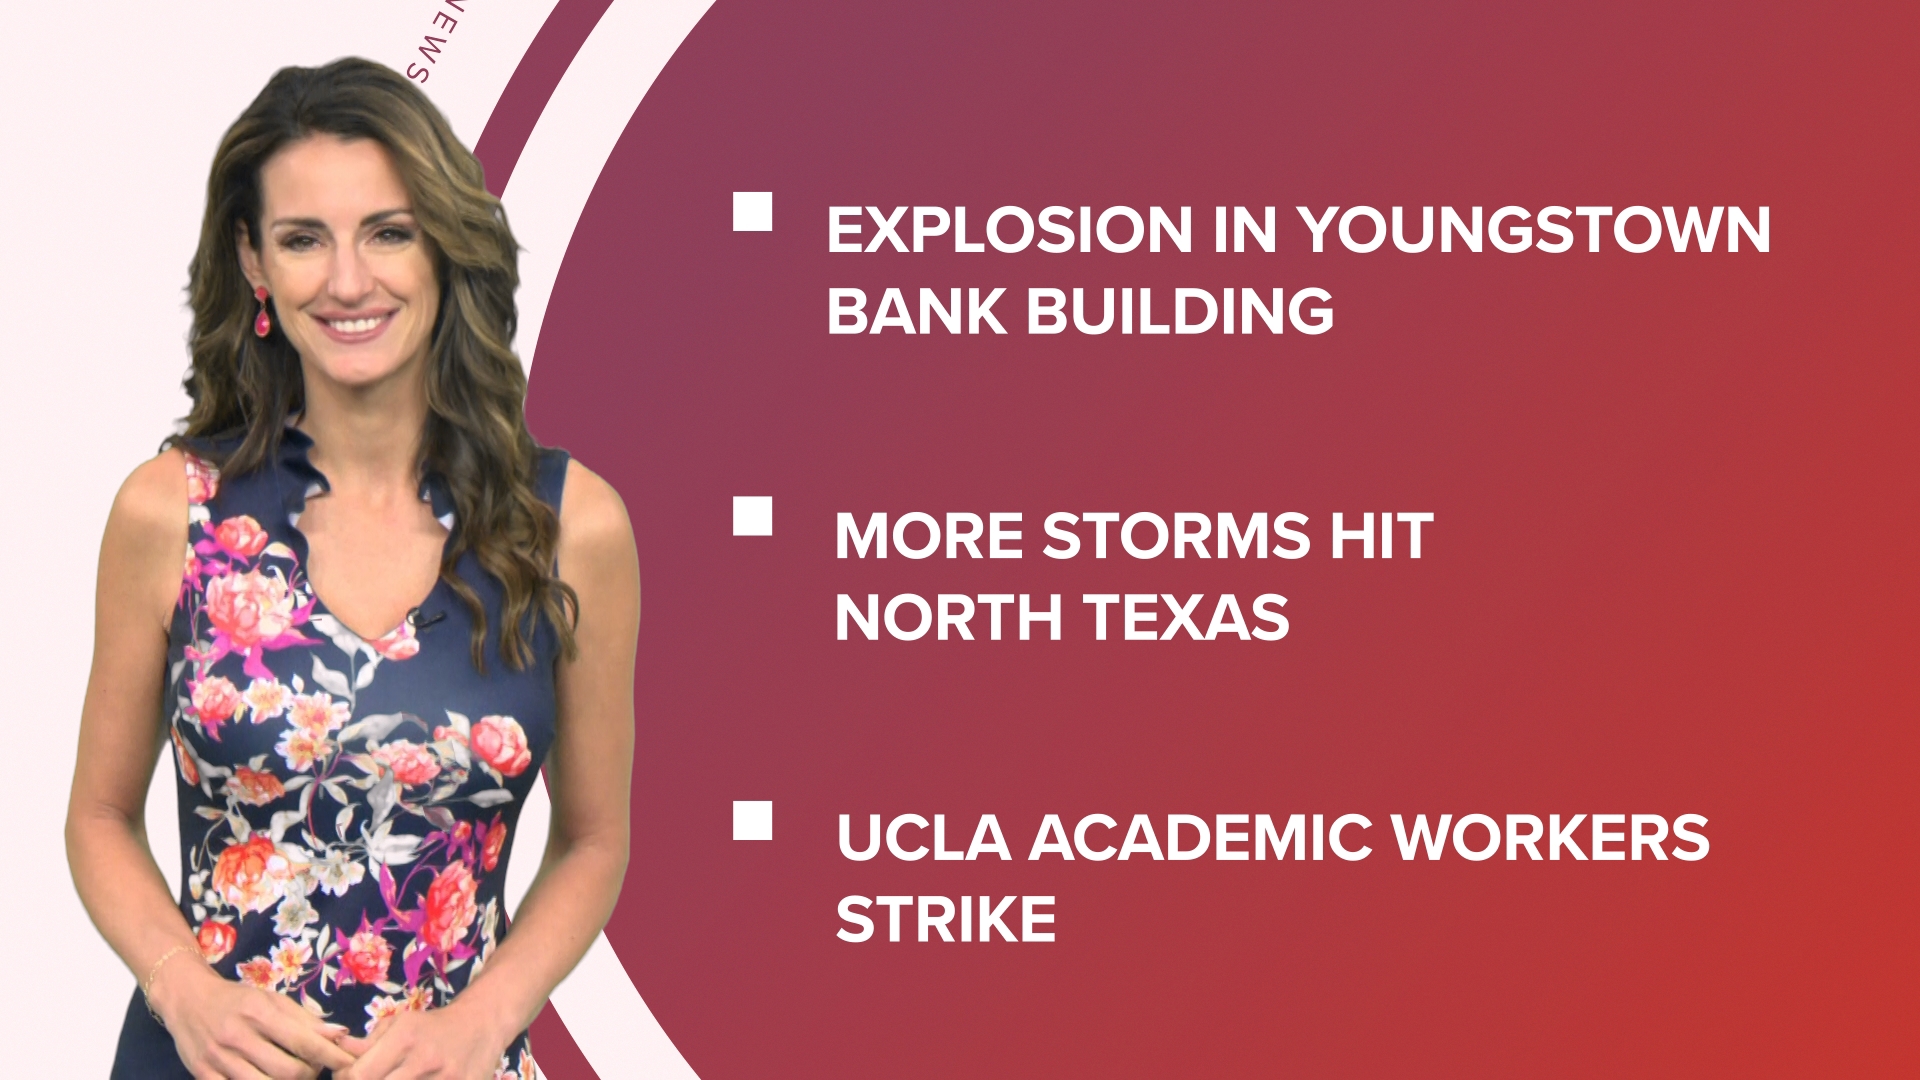 A look at what is happening in the news from an explosion at a bank building in Youngstown, Ohio to storm damage in Texas and Negro League stats added to MLB record.